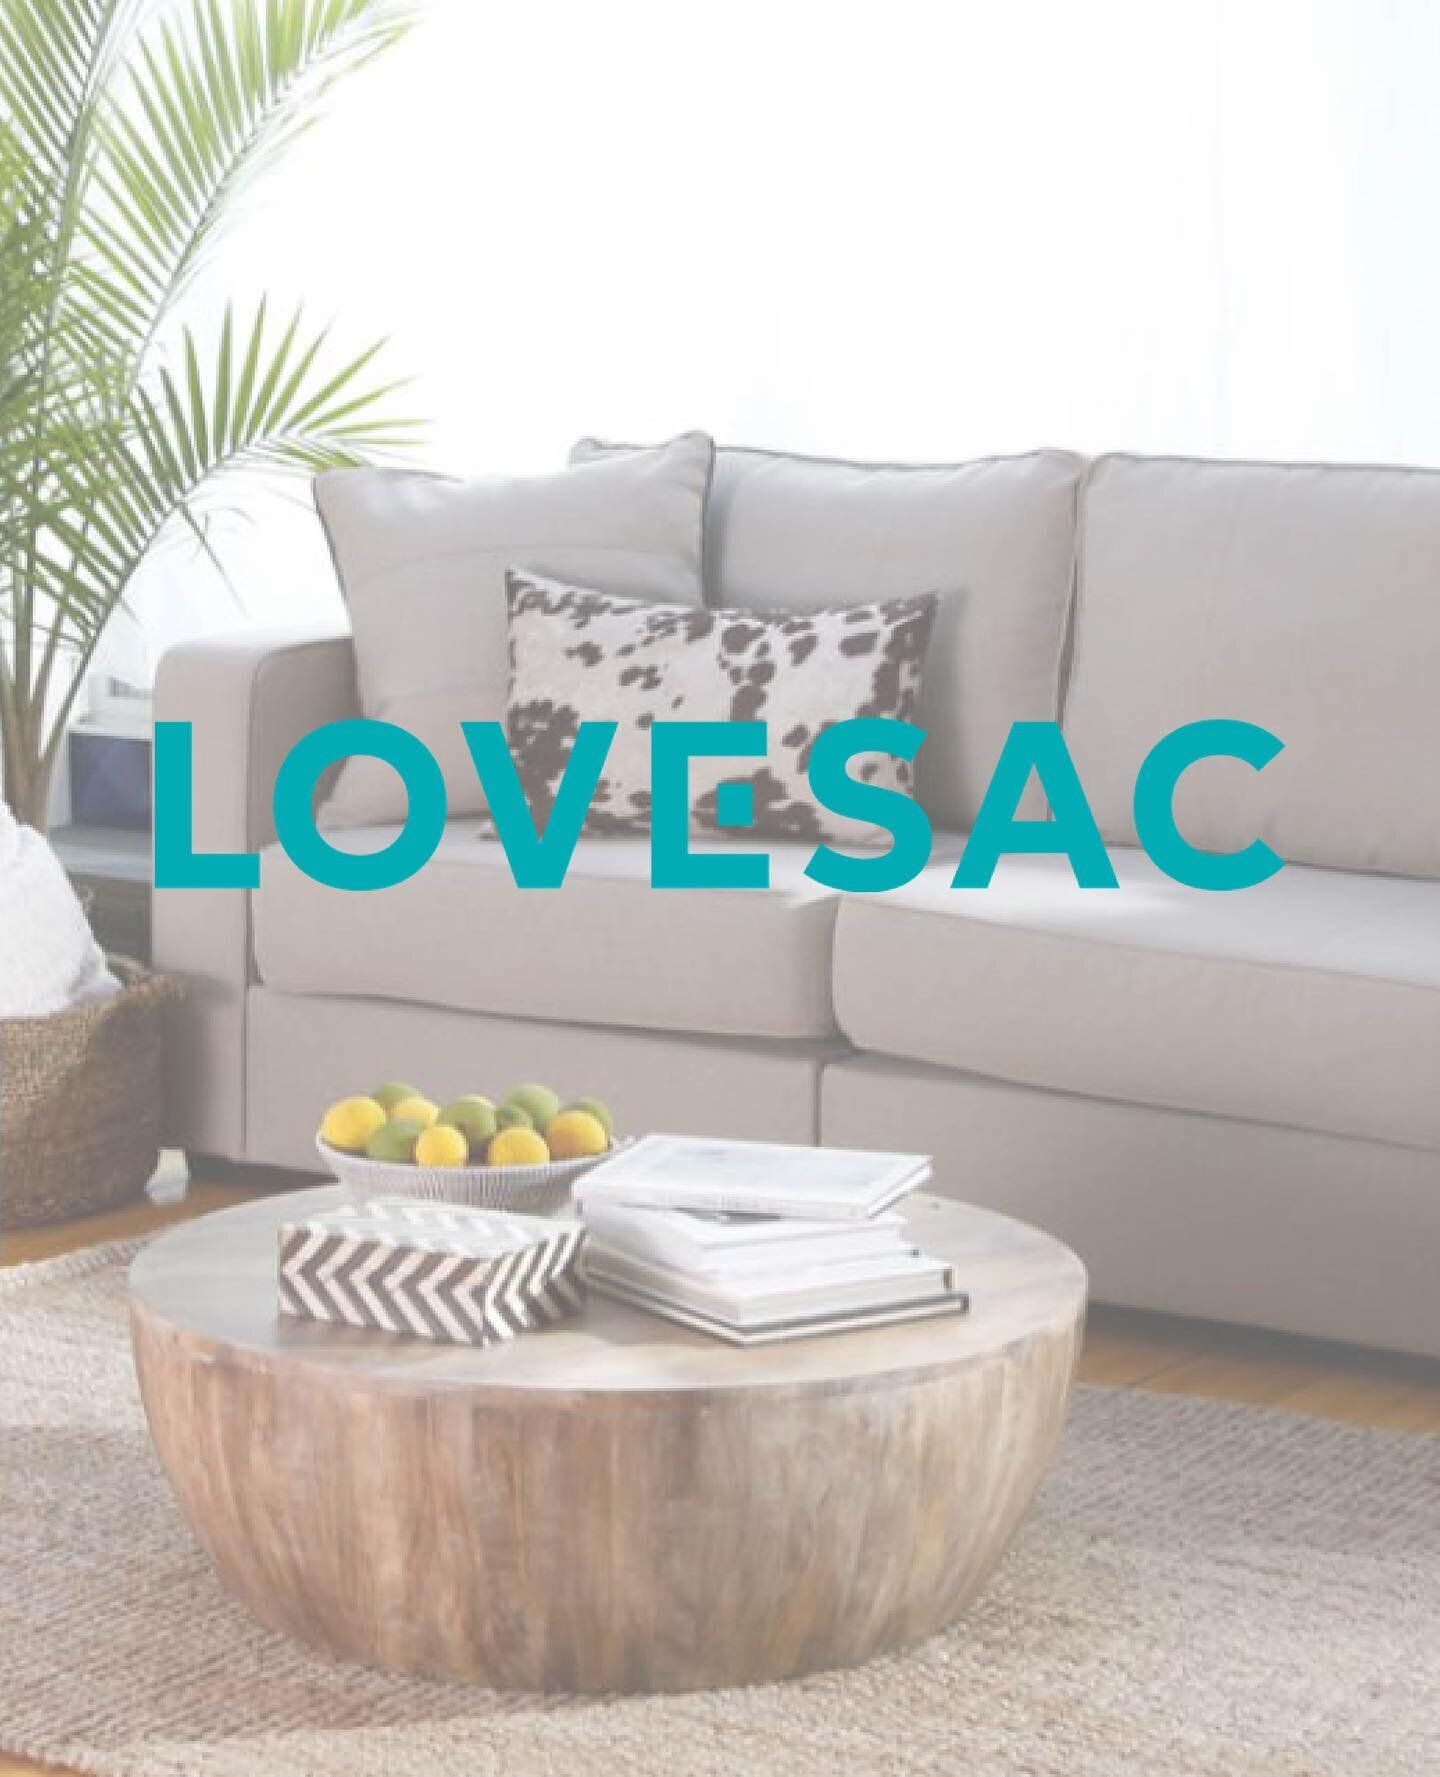 @lovesac is making people&rsquo;s lives more comfortable with their products. Their new showroom will be a great addition to the foundry campus.